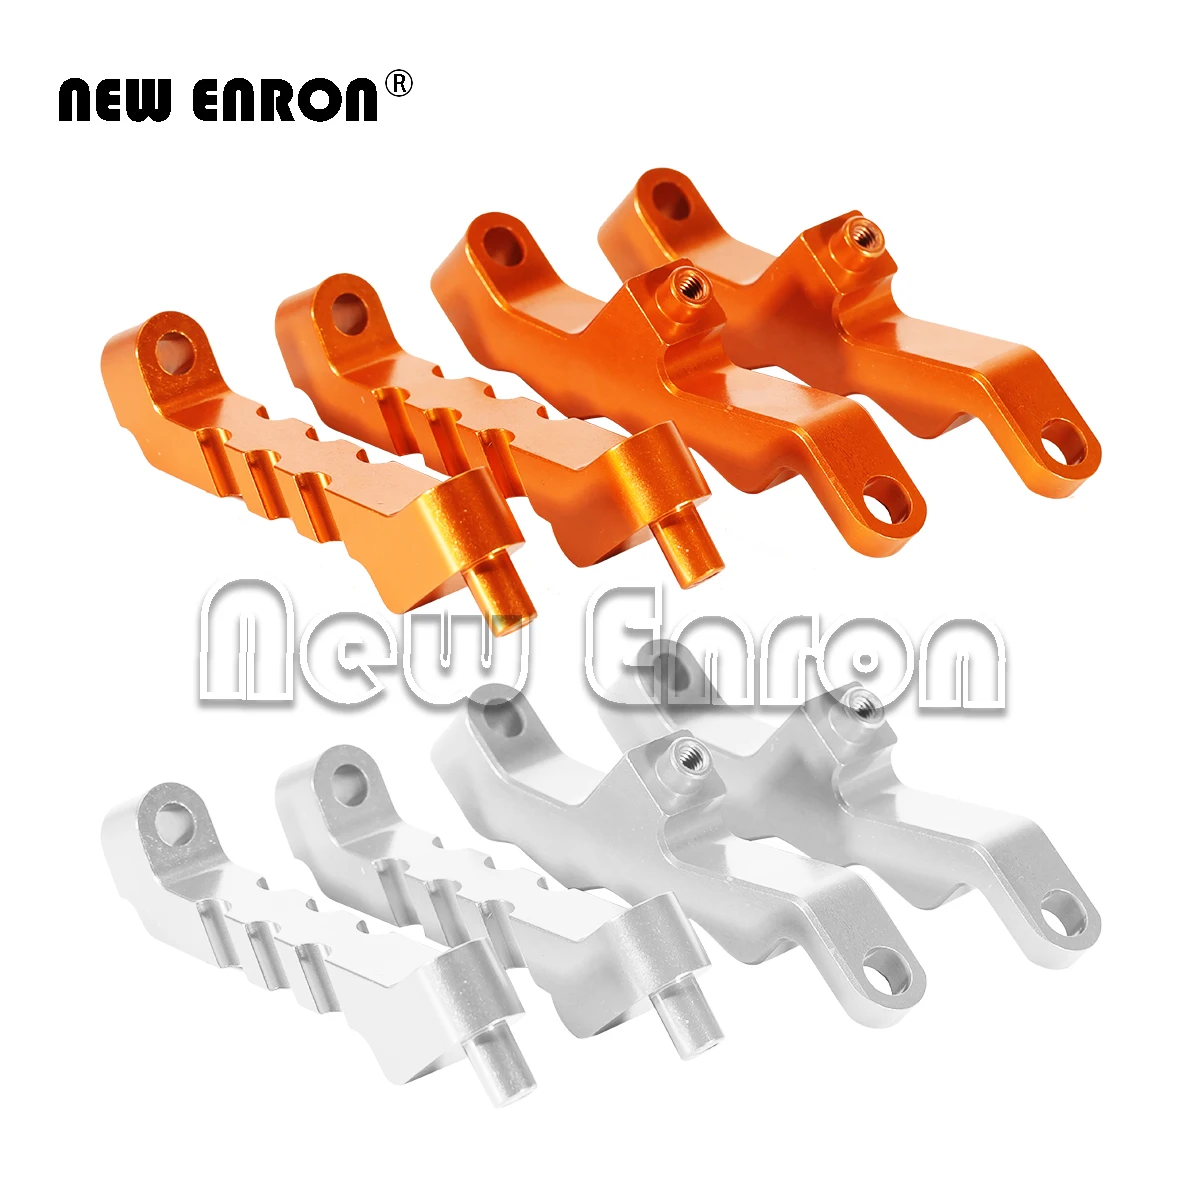 

NEW ENRON 1:5 4Pcs Aluminum Front Shock Tower Supports #85438 For 1/5 HPI 5B 5SC 5T 5R SS 1970 T1000 KM ROVAN